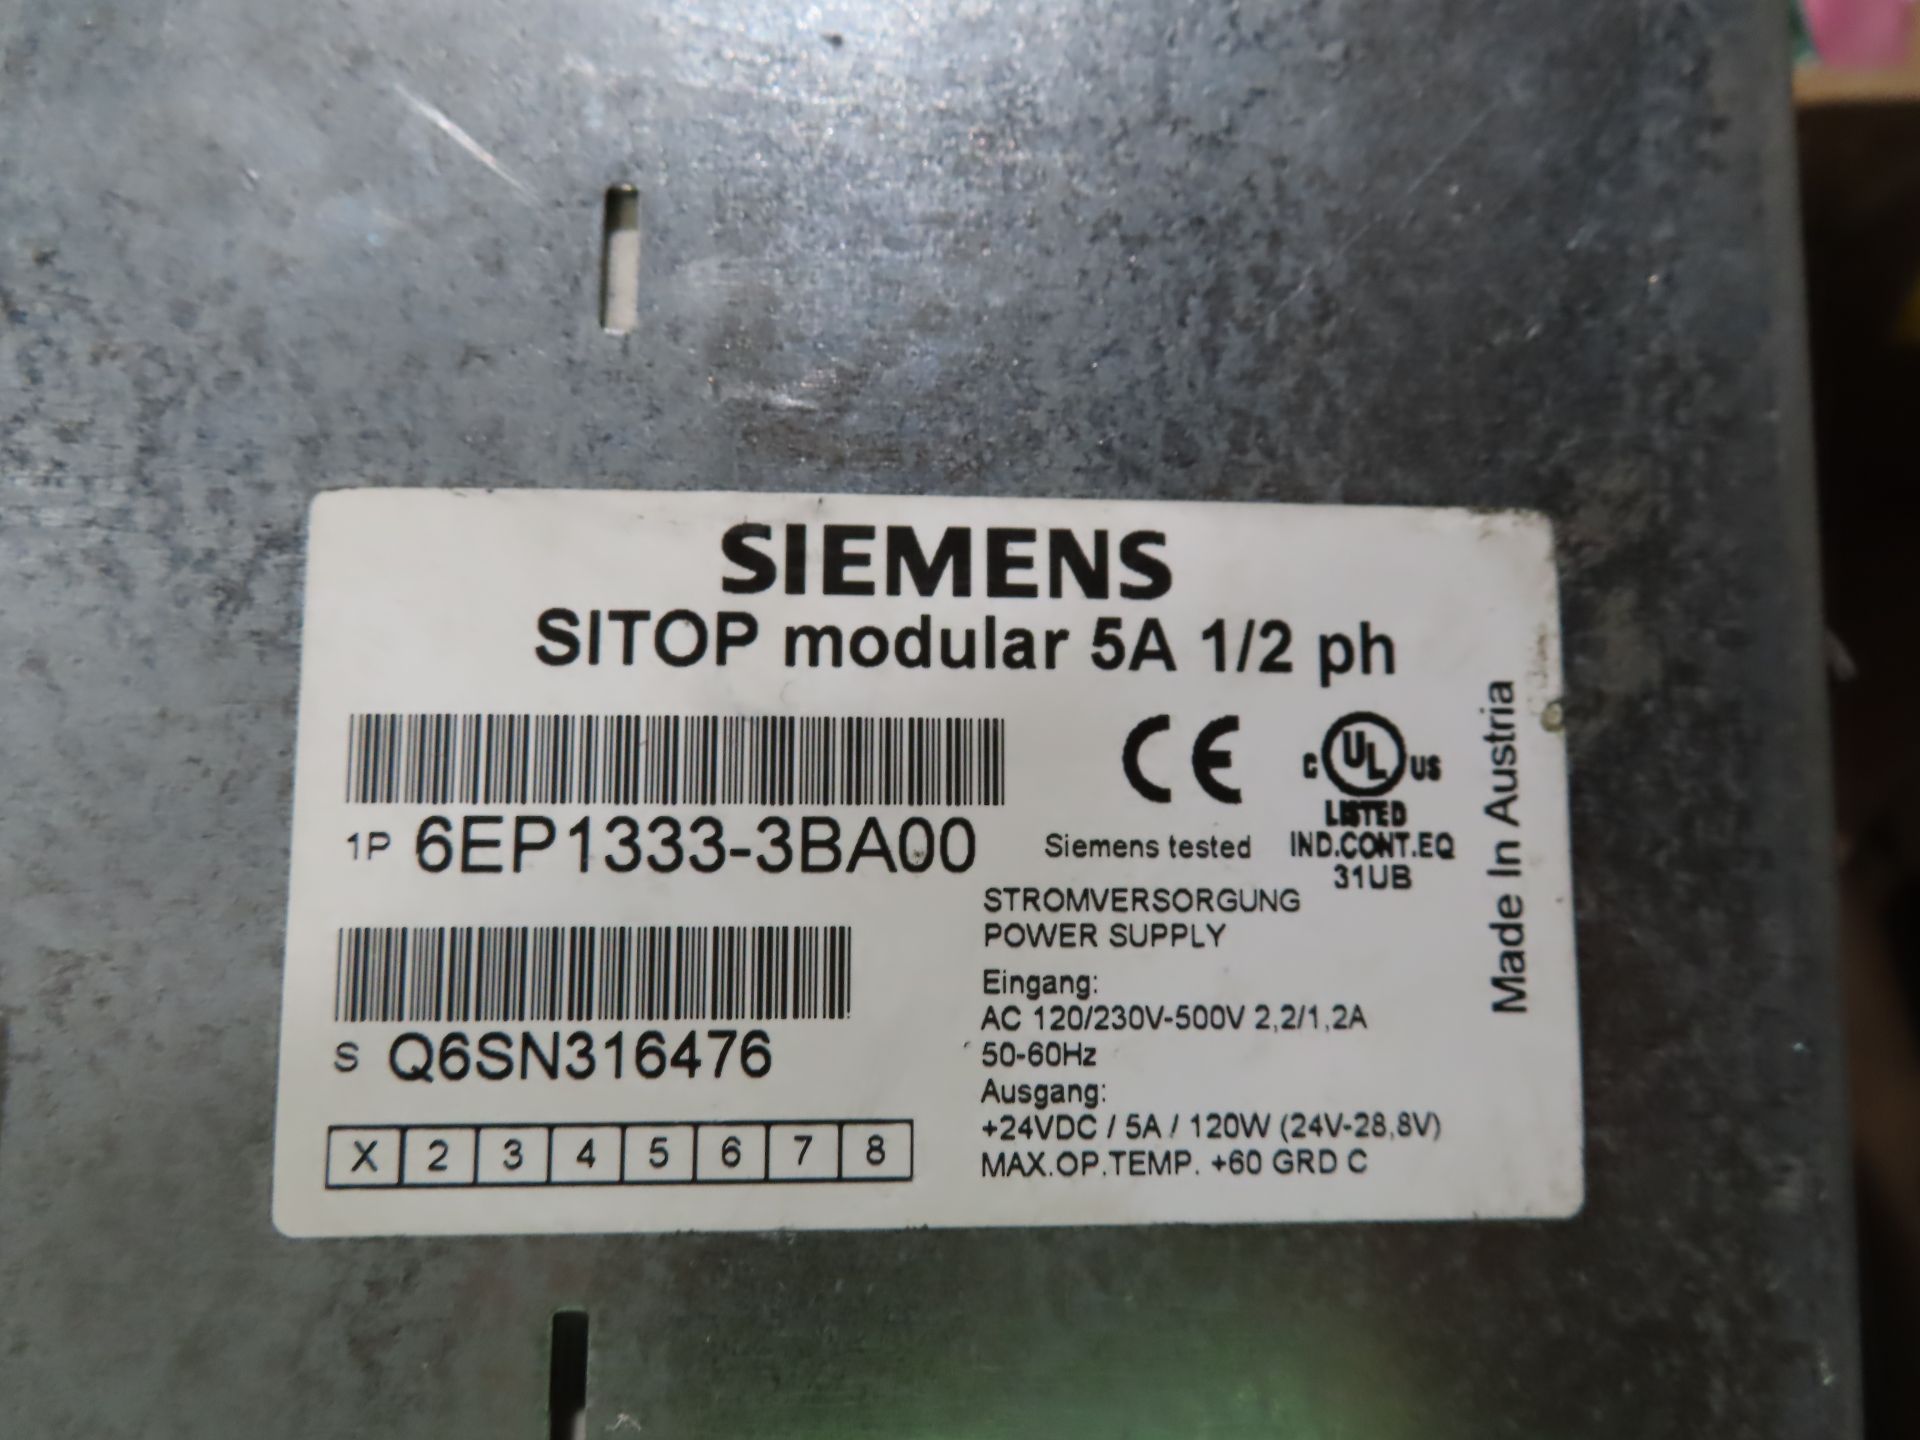 Siemens SITOP model 6EP1333-3BA00 power supply, as always, with Brolyn LLC auctions, all lots can be - Image 2 of 2